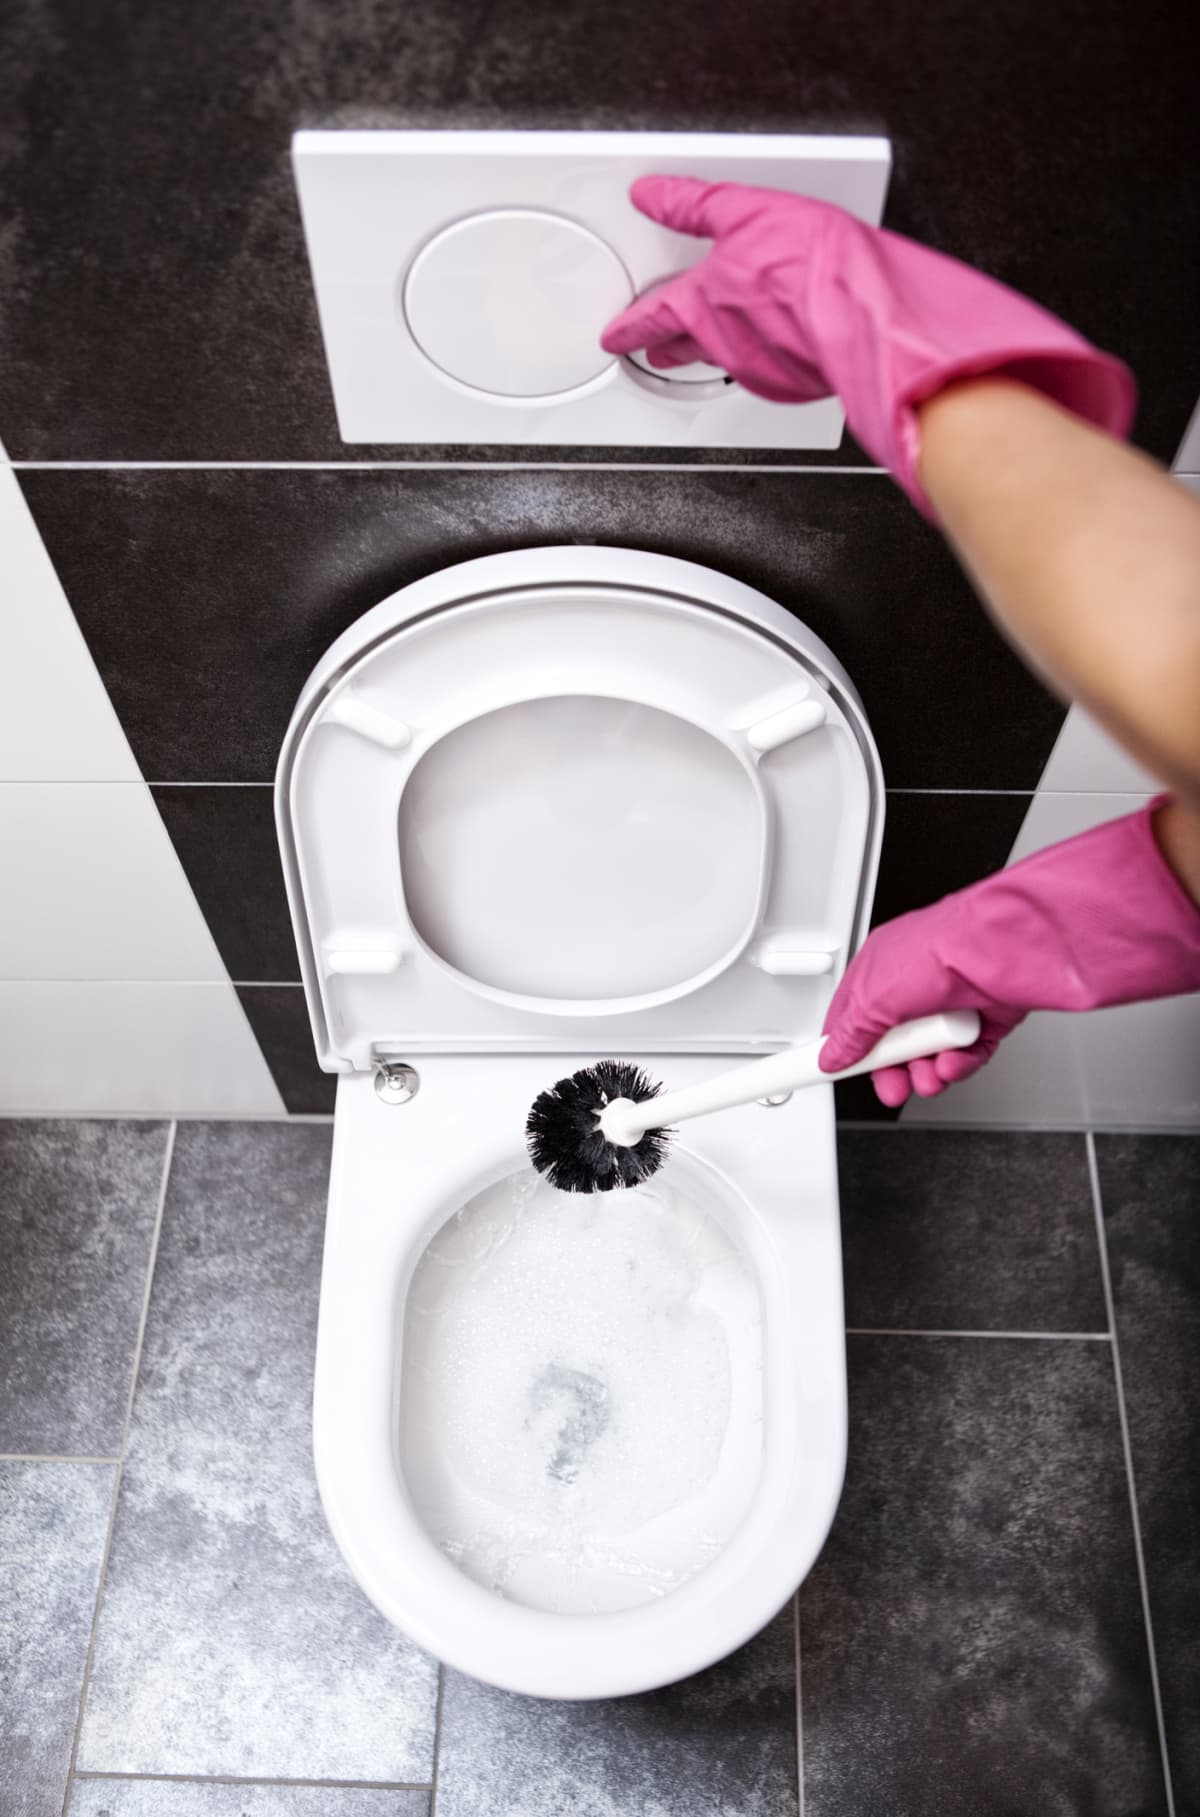 A person cleaning the toilet with toilet brush